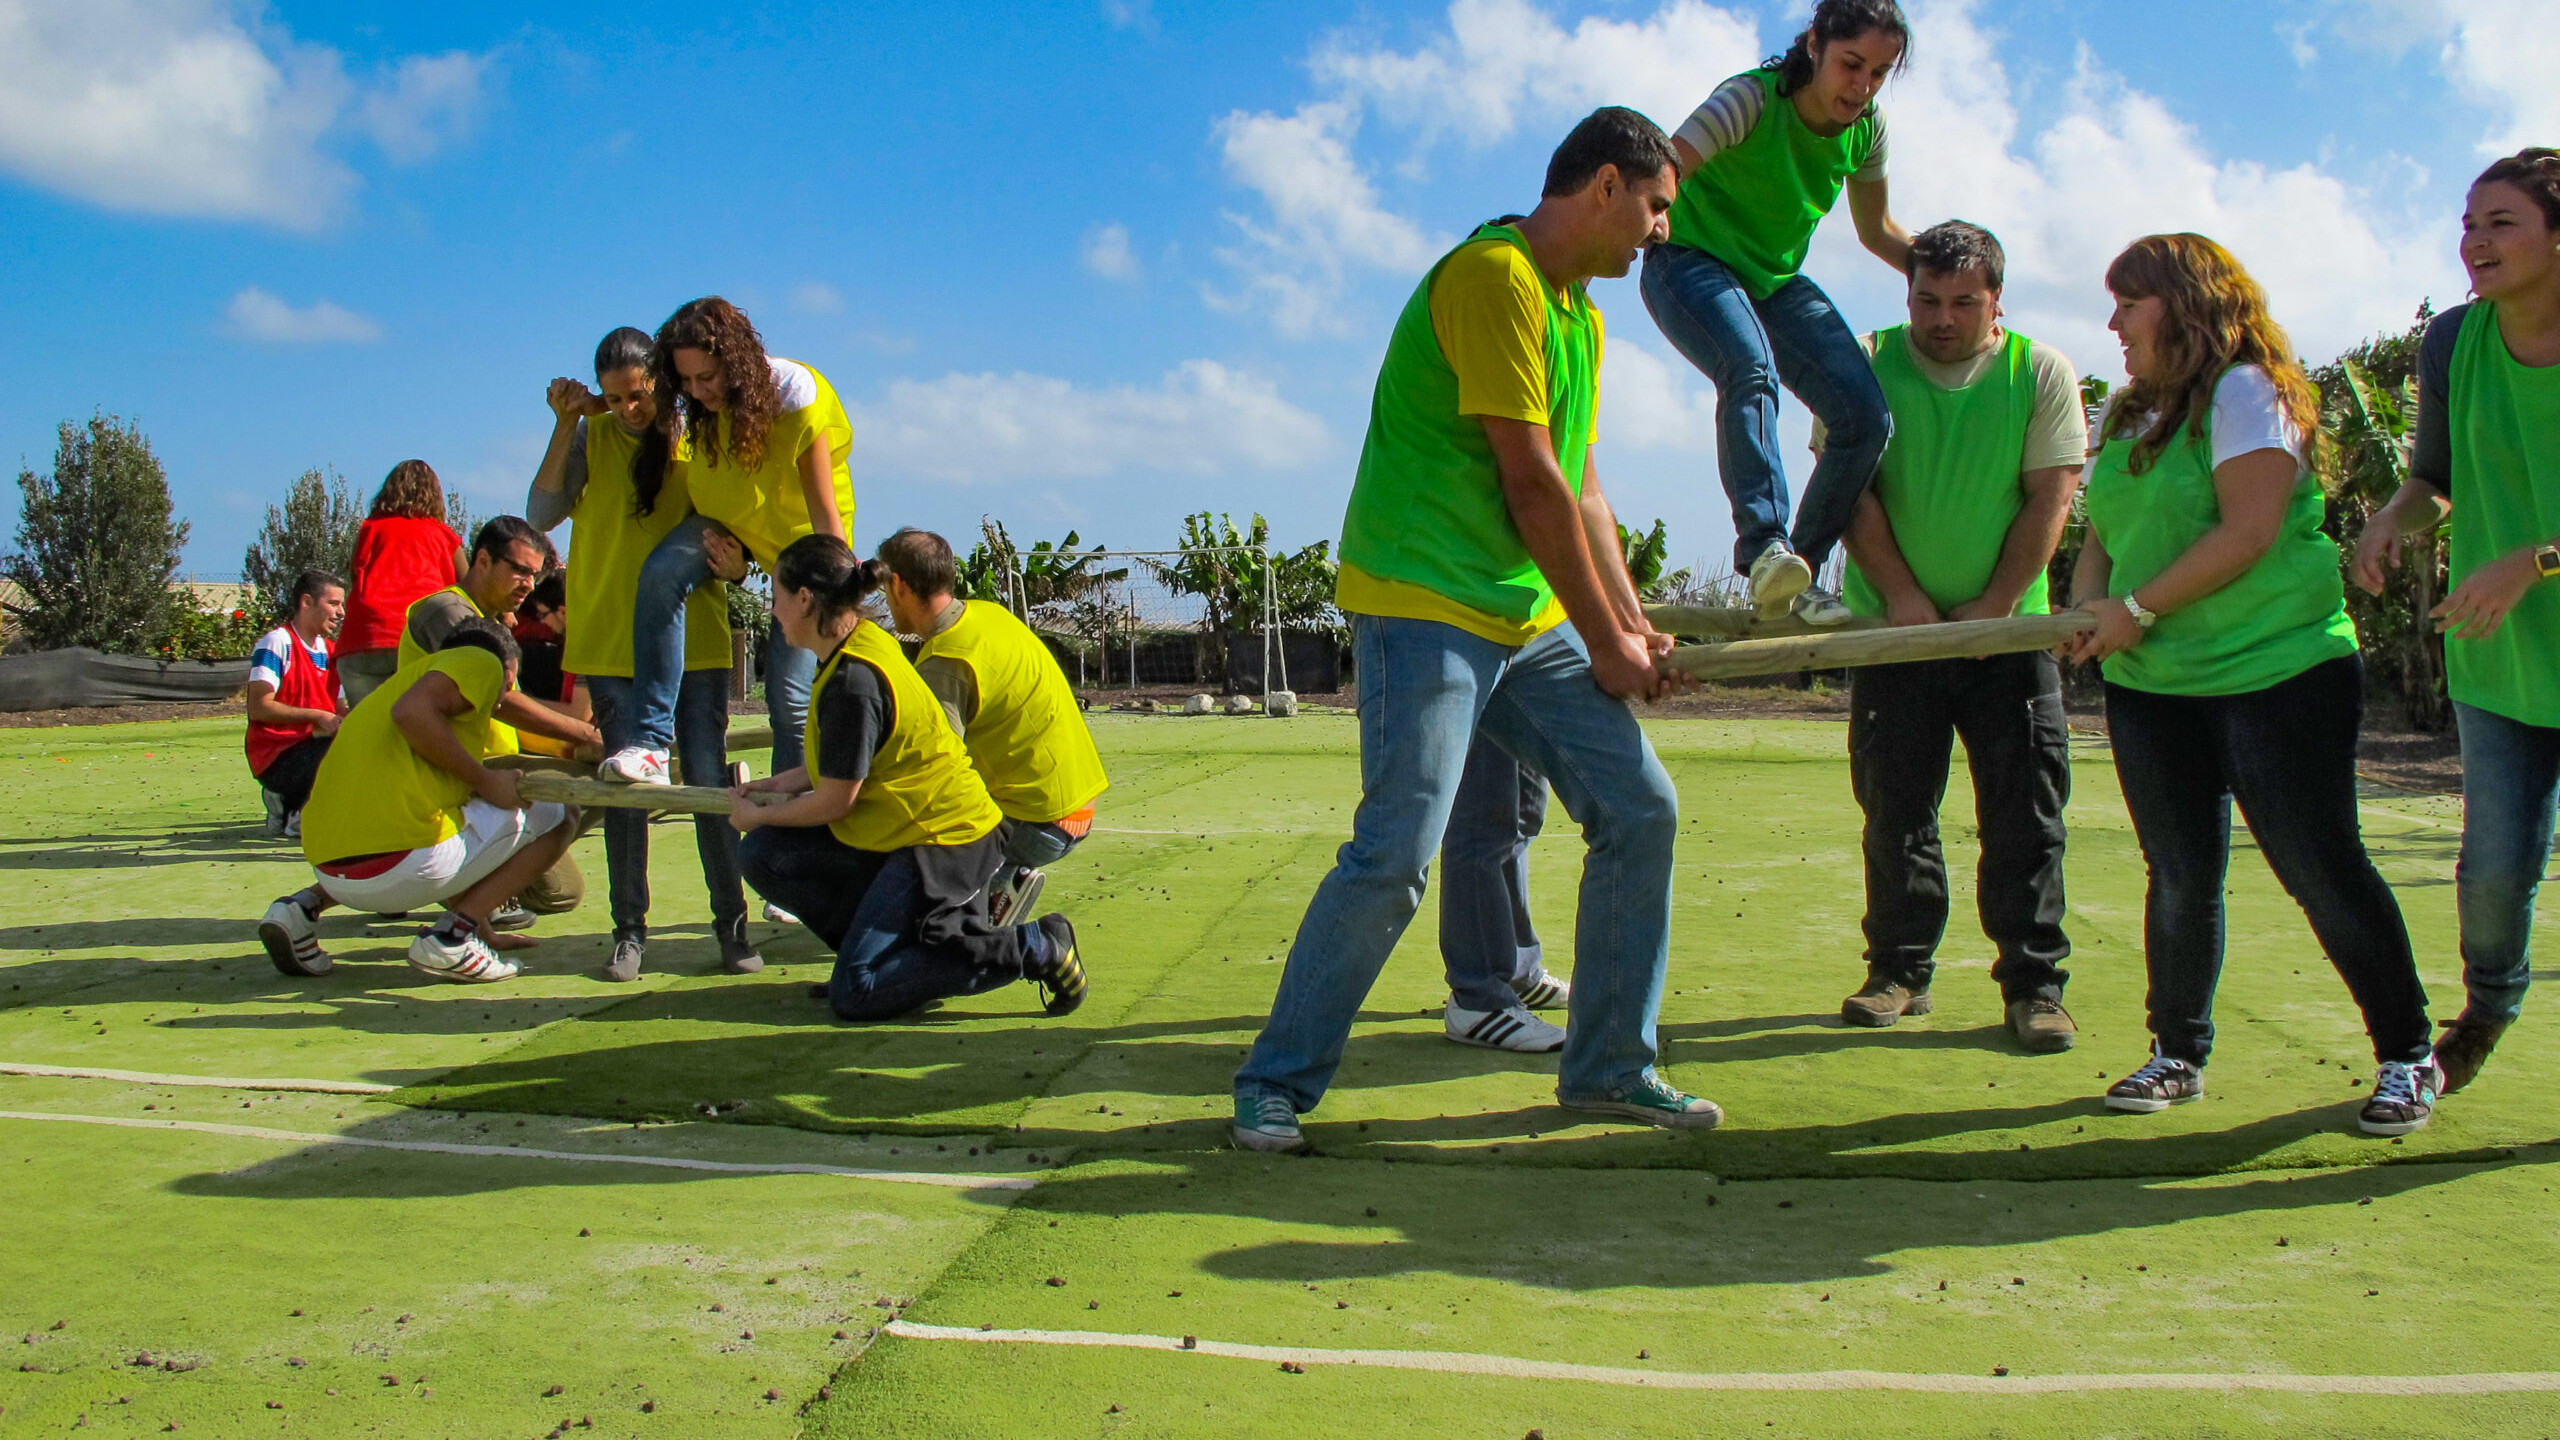 A group of people wearing green playing a team building game on a green field